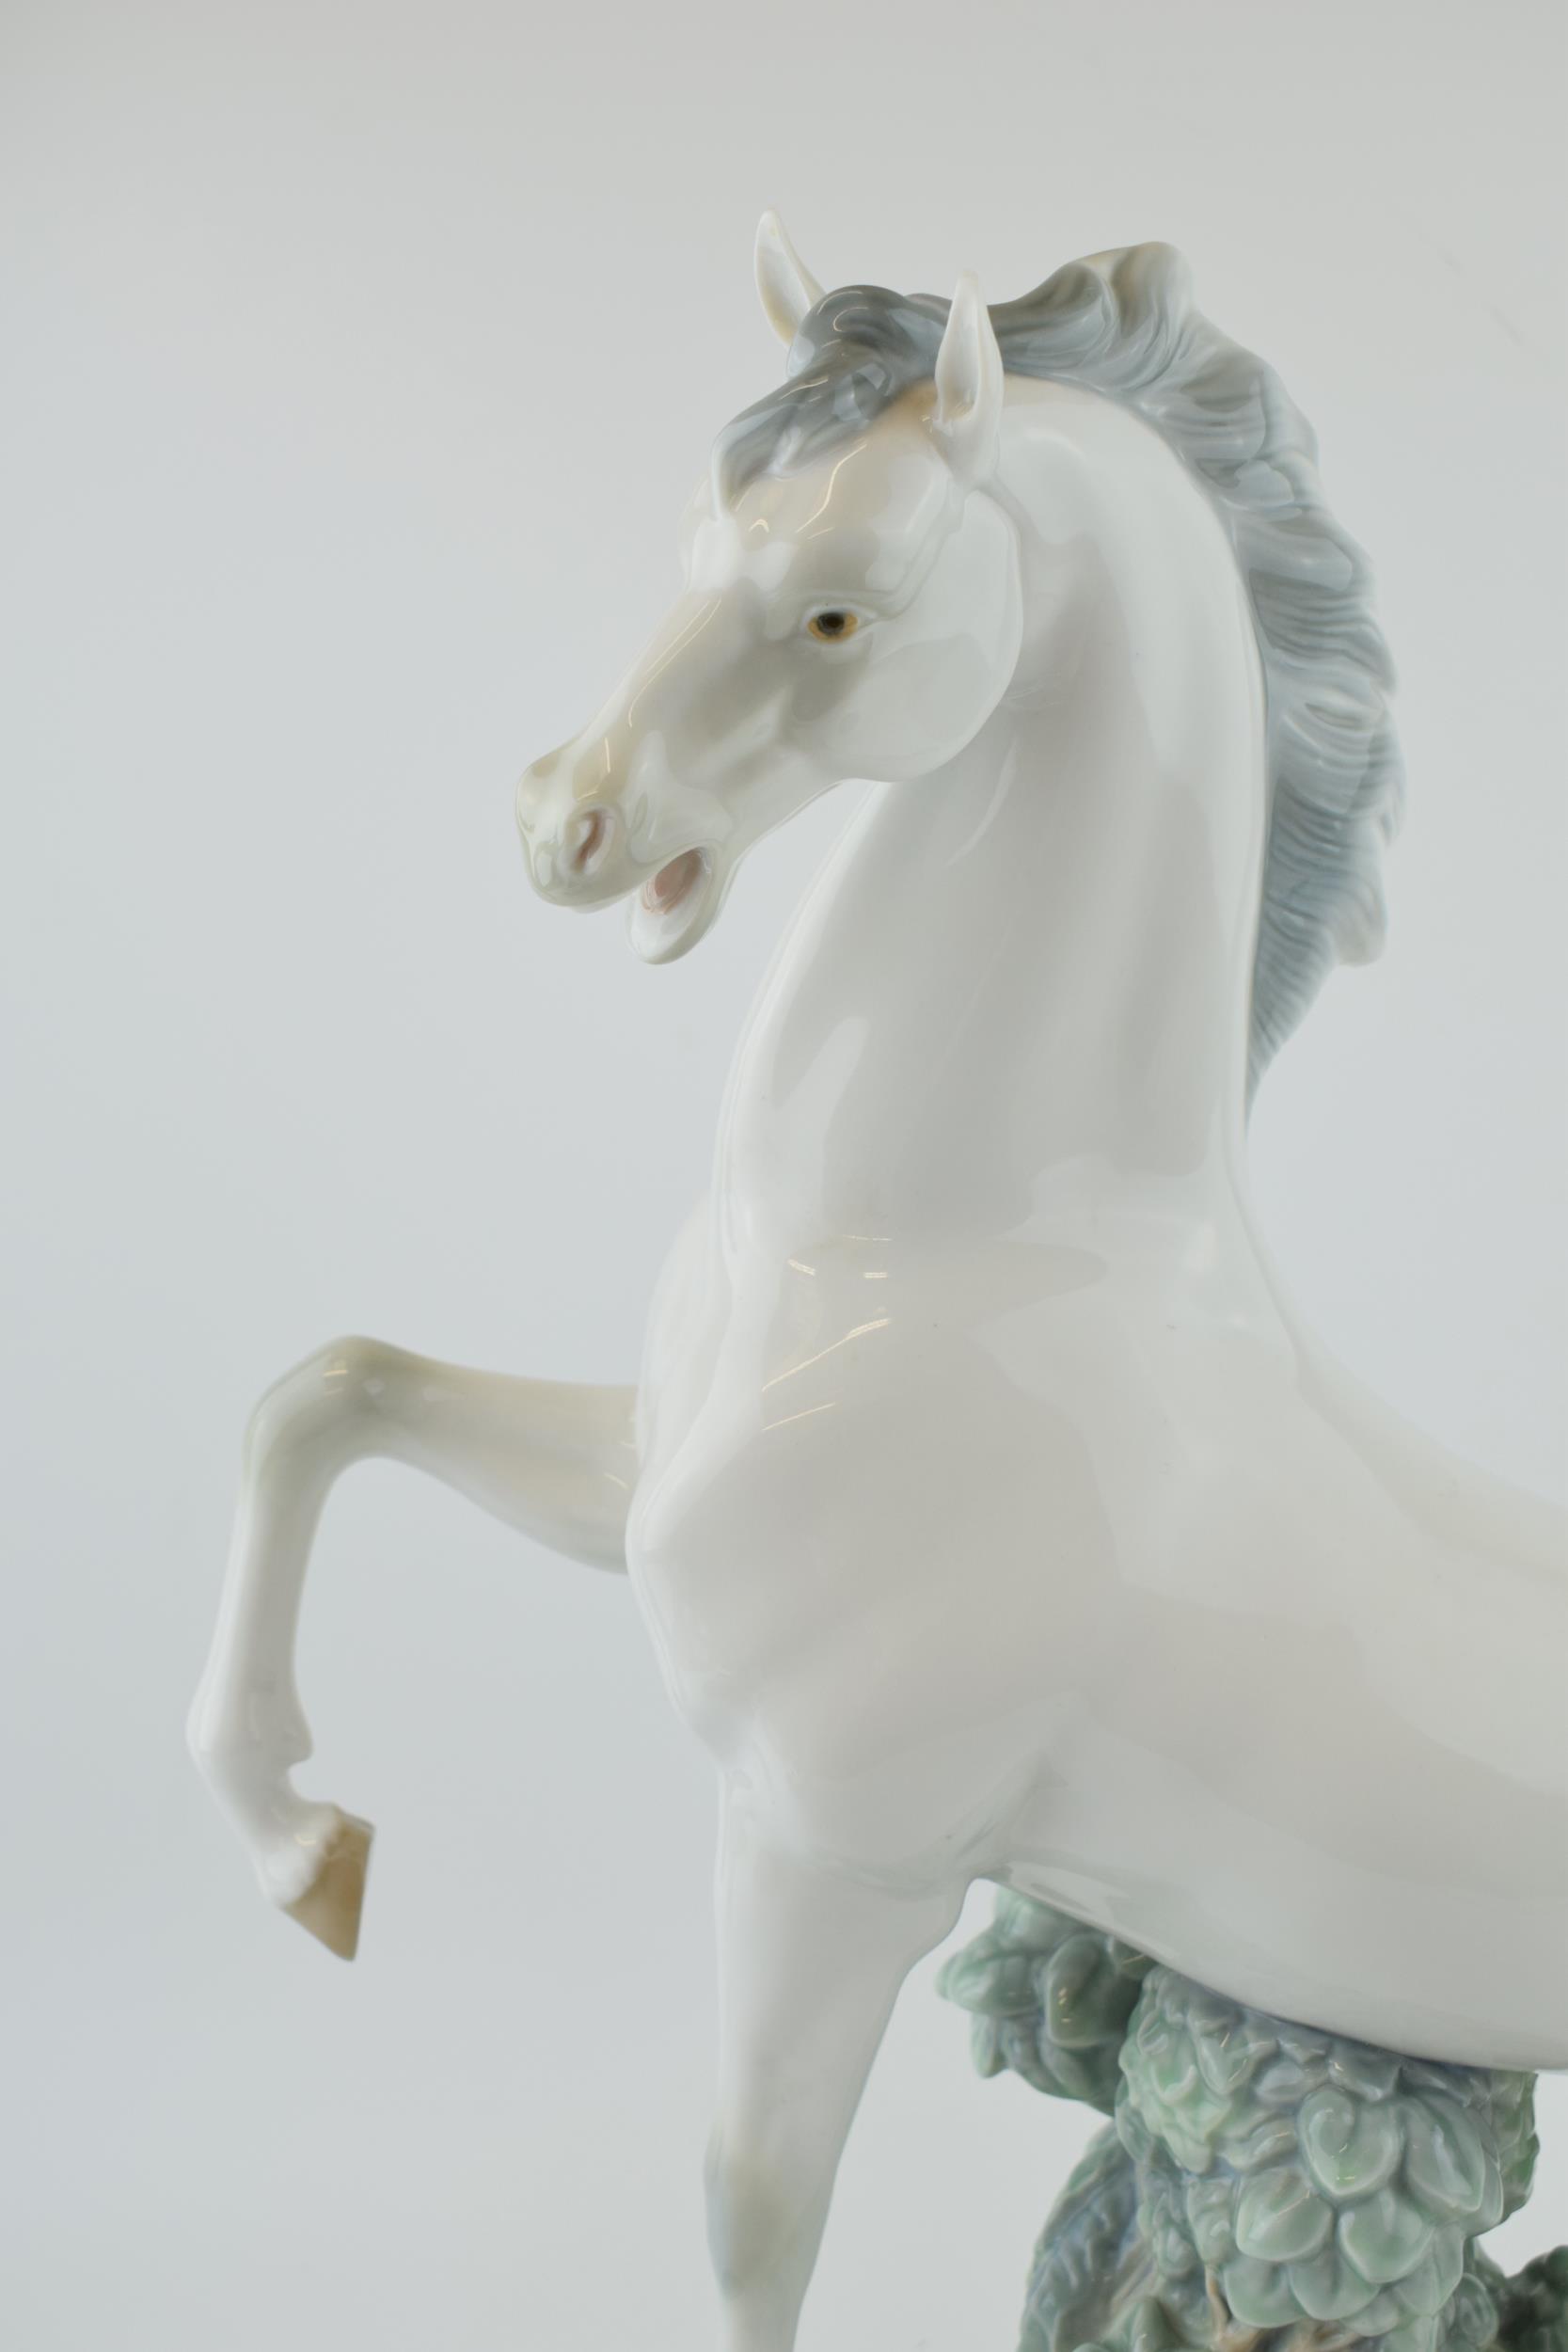 Large Lladro horse figure 'Caballo Arrogante' 4781, 44cm tall. In good condition with no obvious - Image 3 of 5